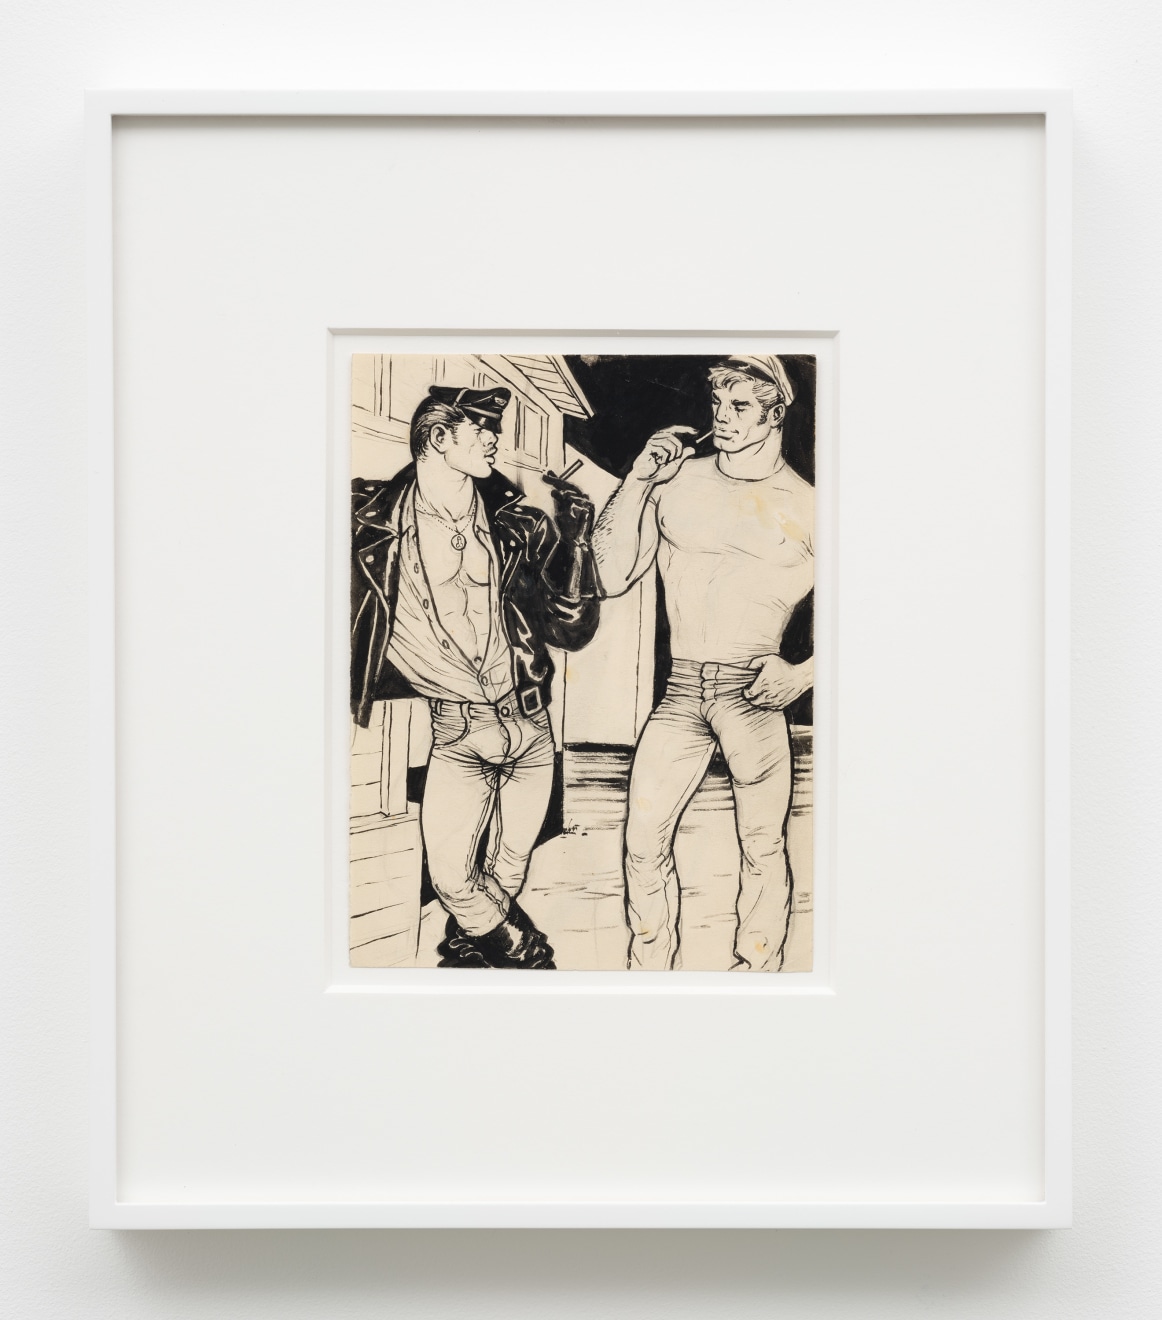 Tom of Finland, Untitled, 1967